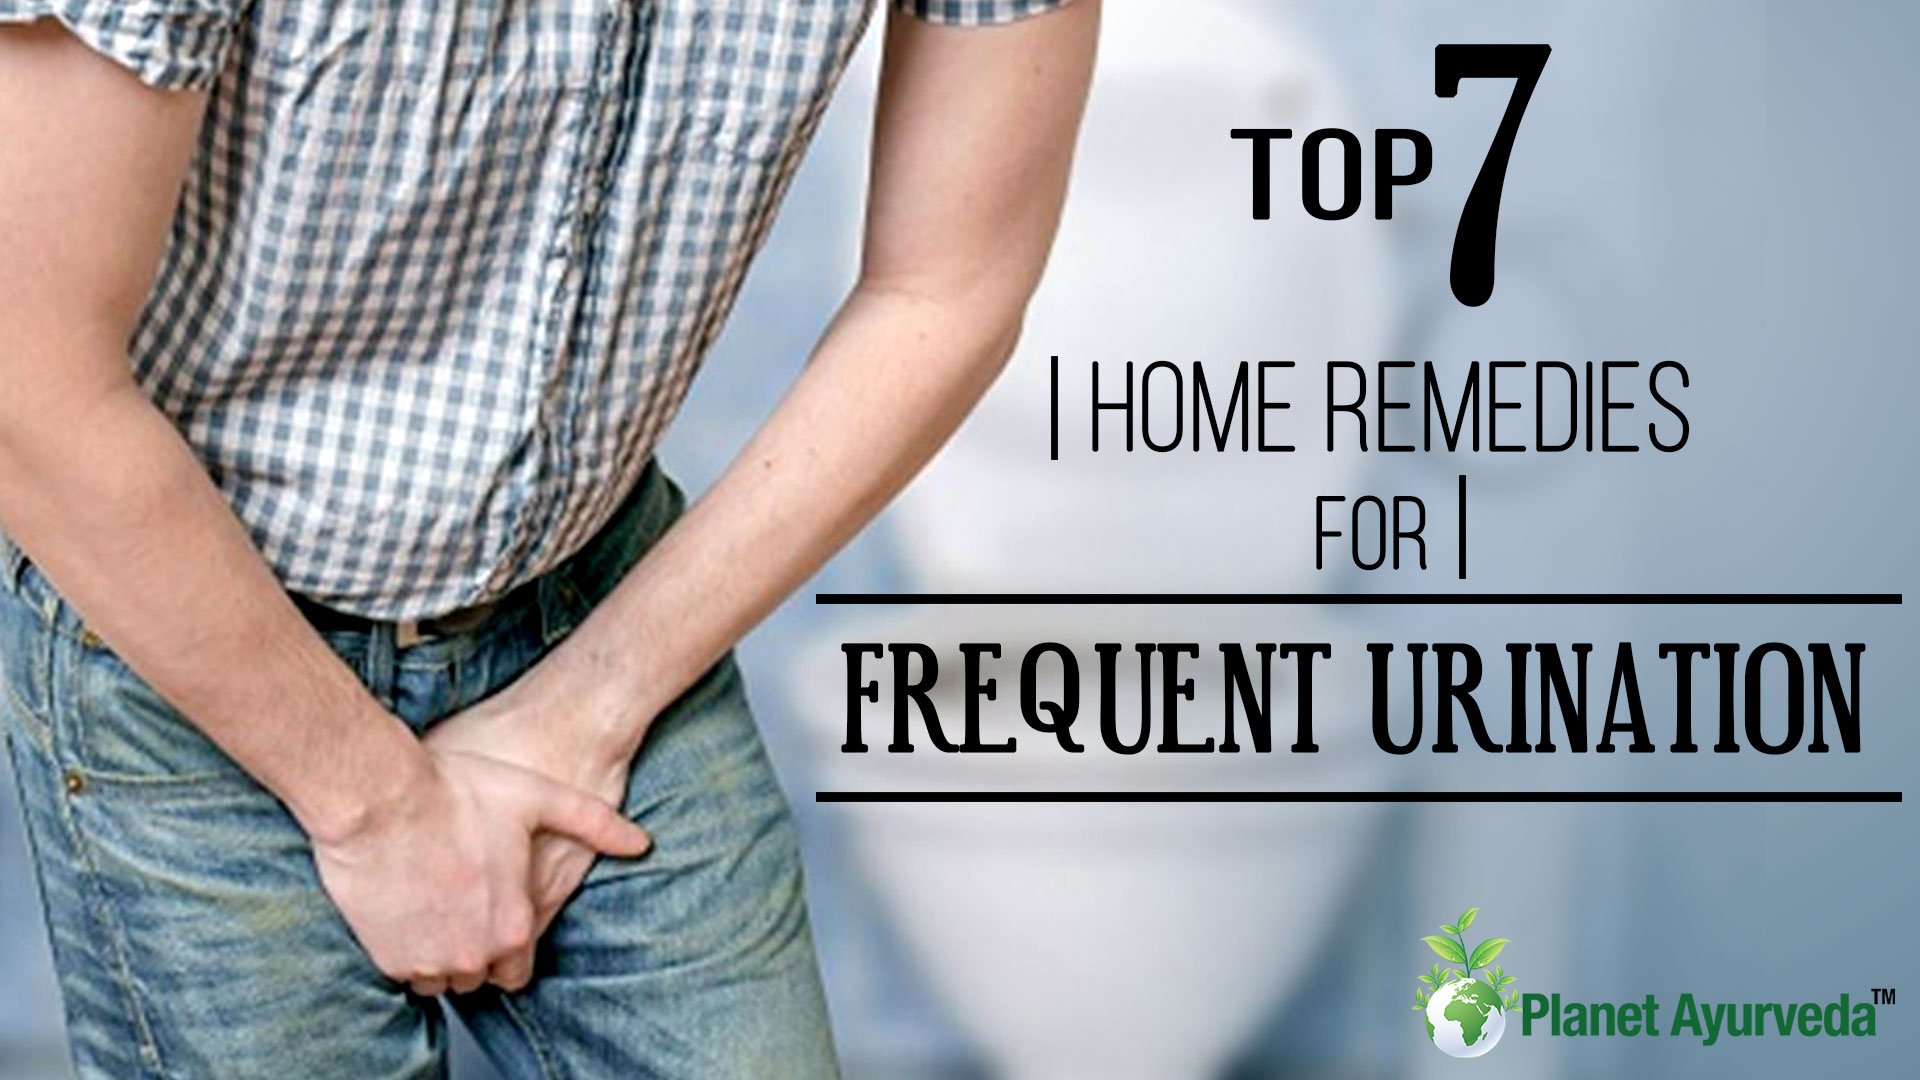 Top 7 Home Remedies for Frequent Urination